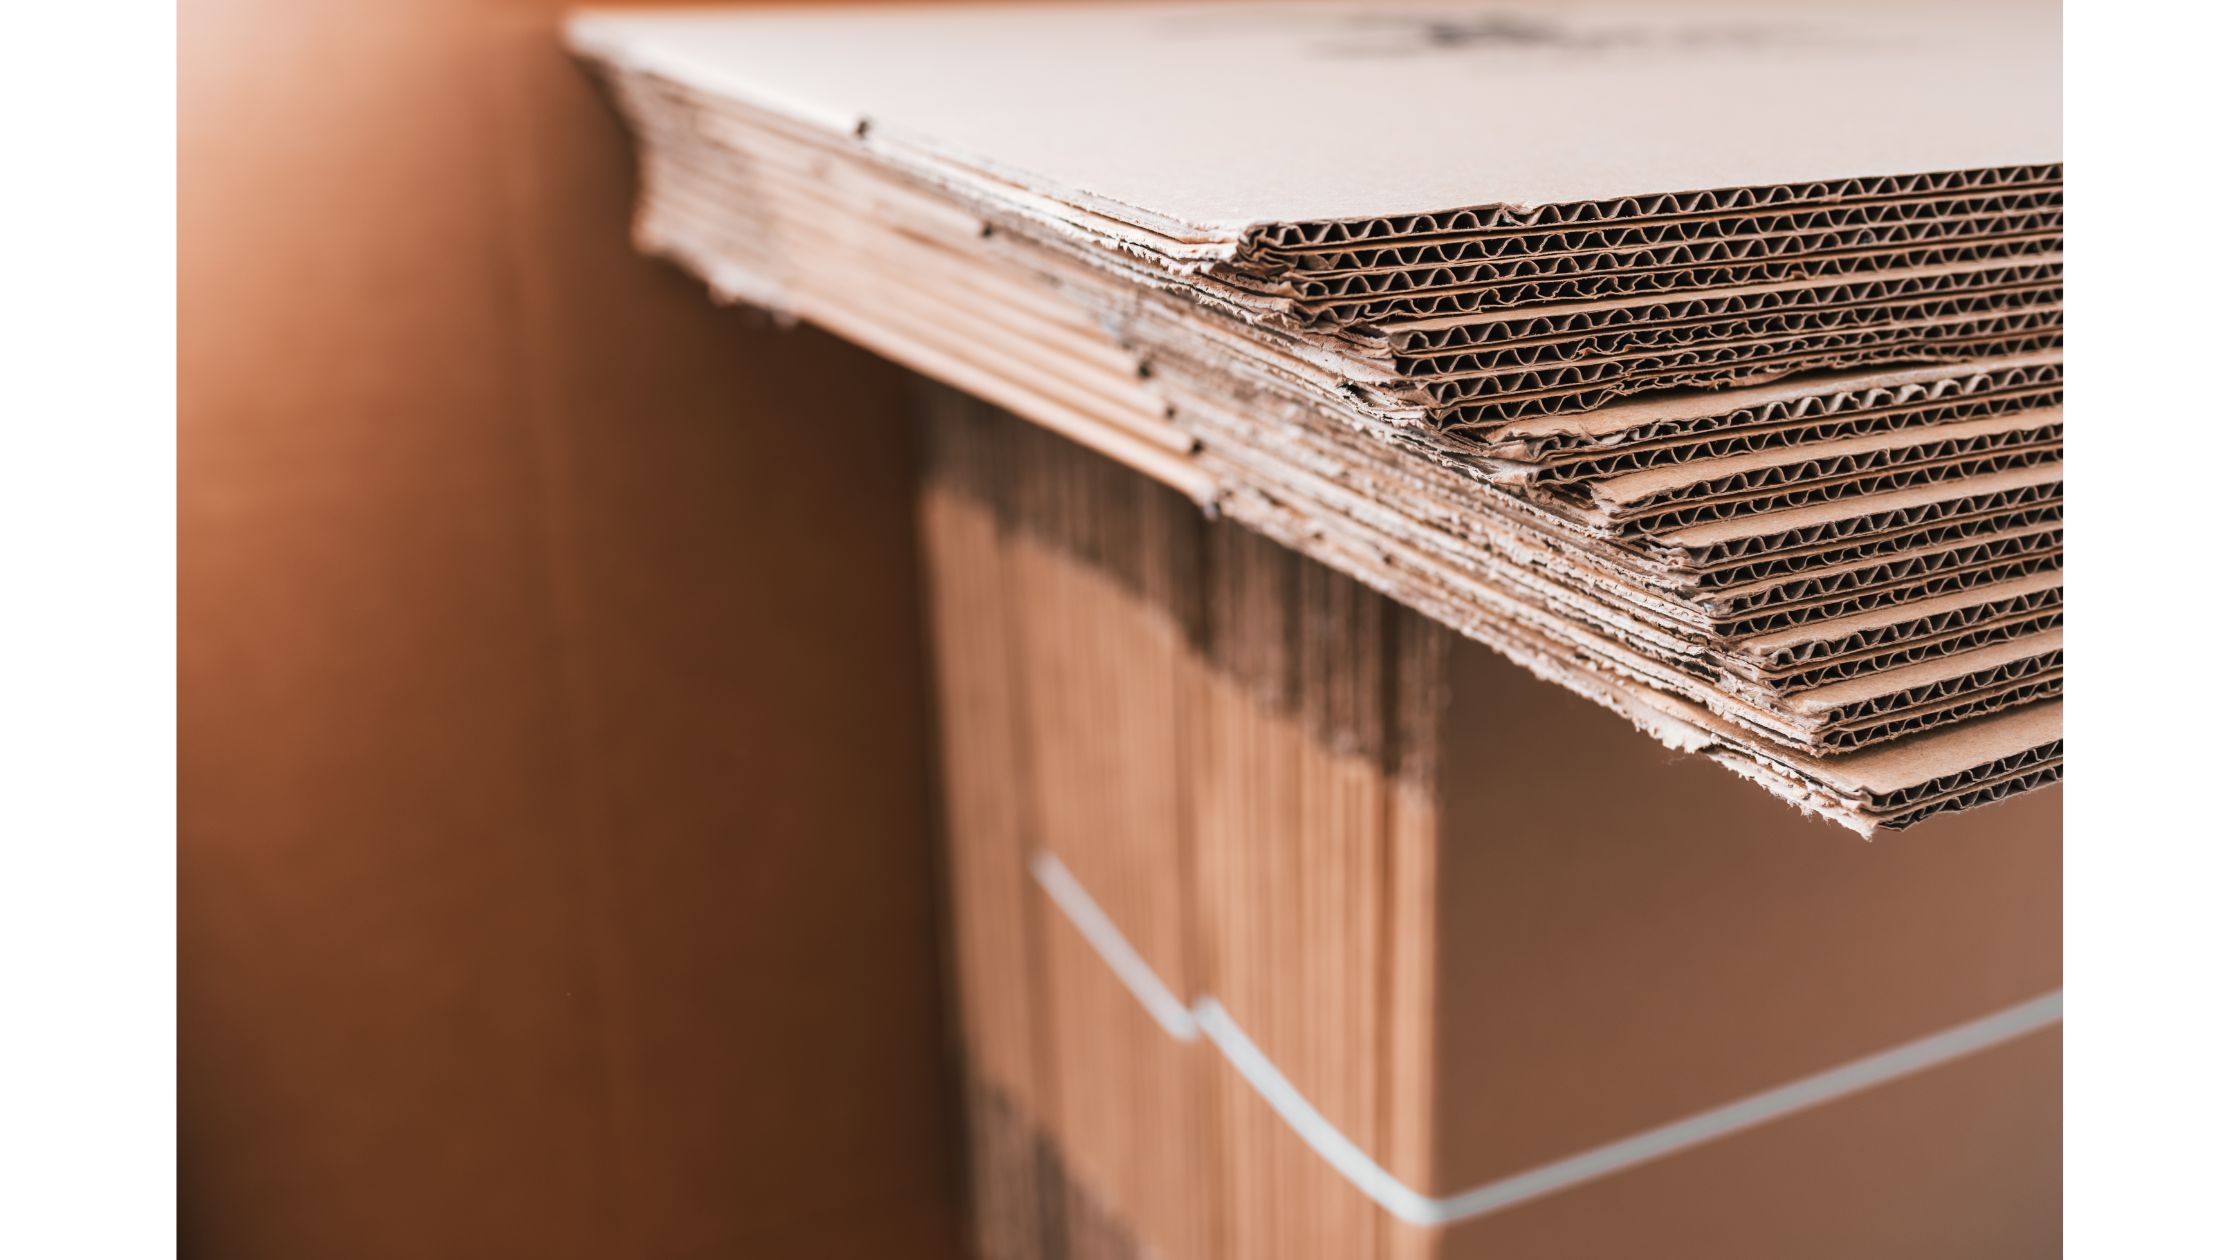 Get the Best Deals on Corrugated Boxes: Buy in Bulk and Save on Custom Sizes and Shipping Supplies